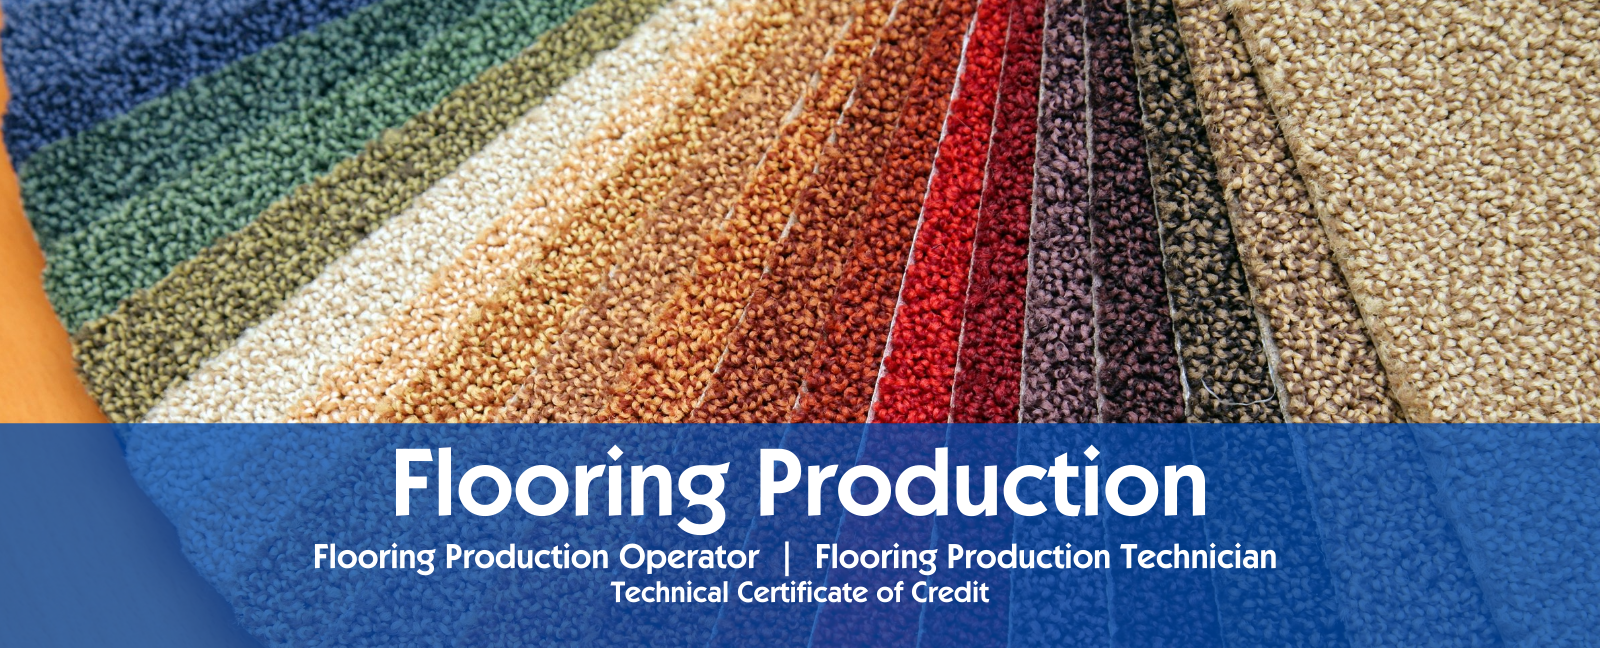 Flooring Production 
Flooring Production Operator 
Flooring Production Technician 
Technical Certificate of Credit